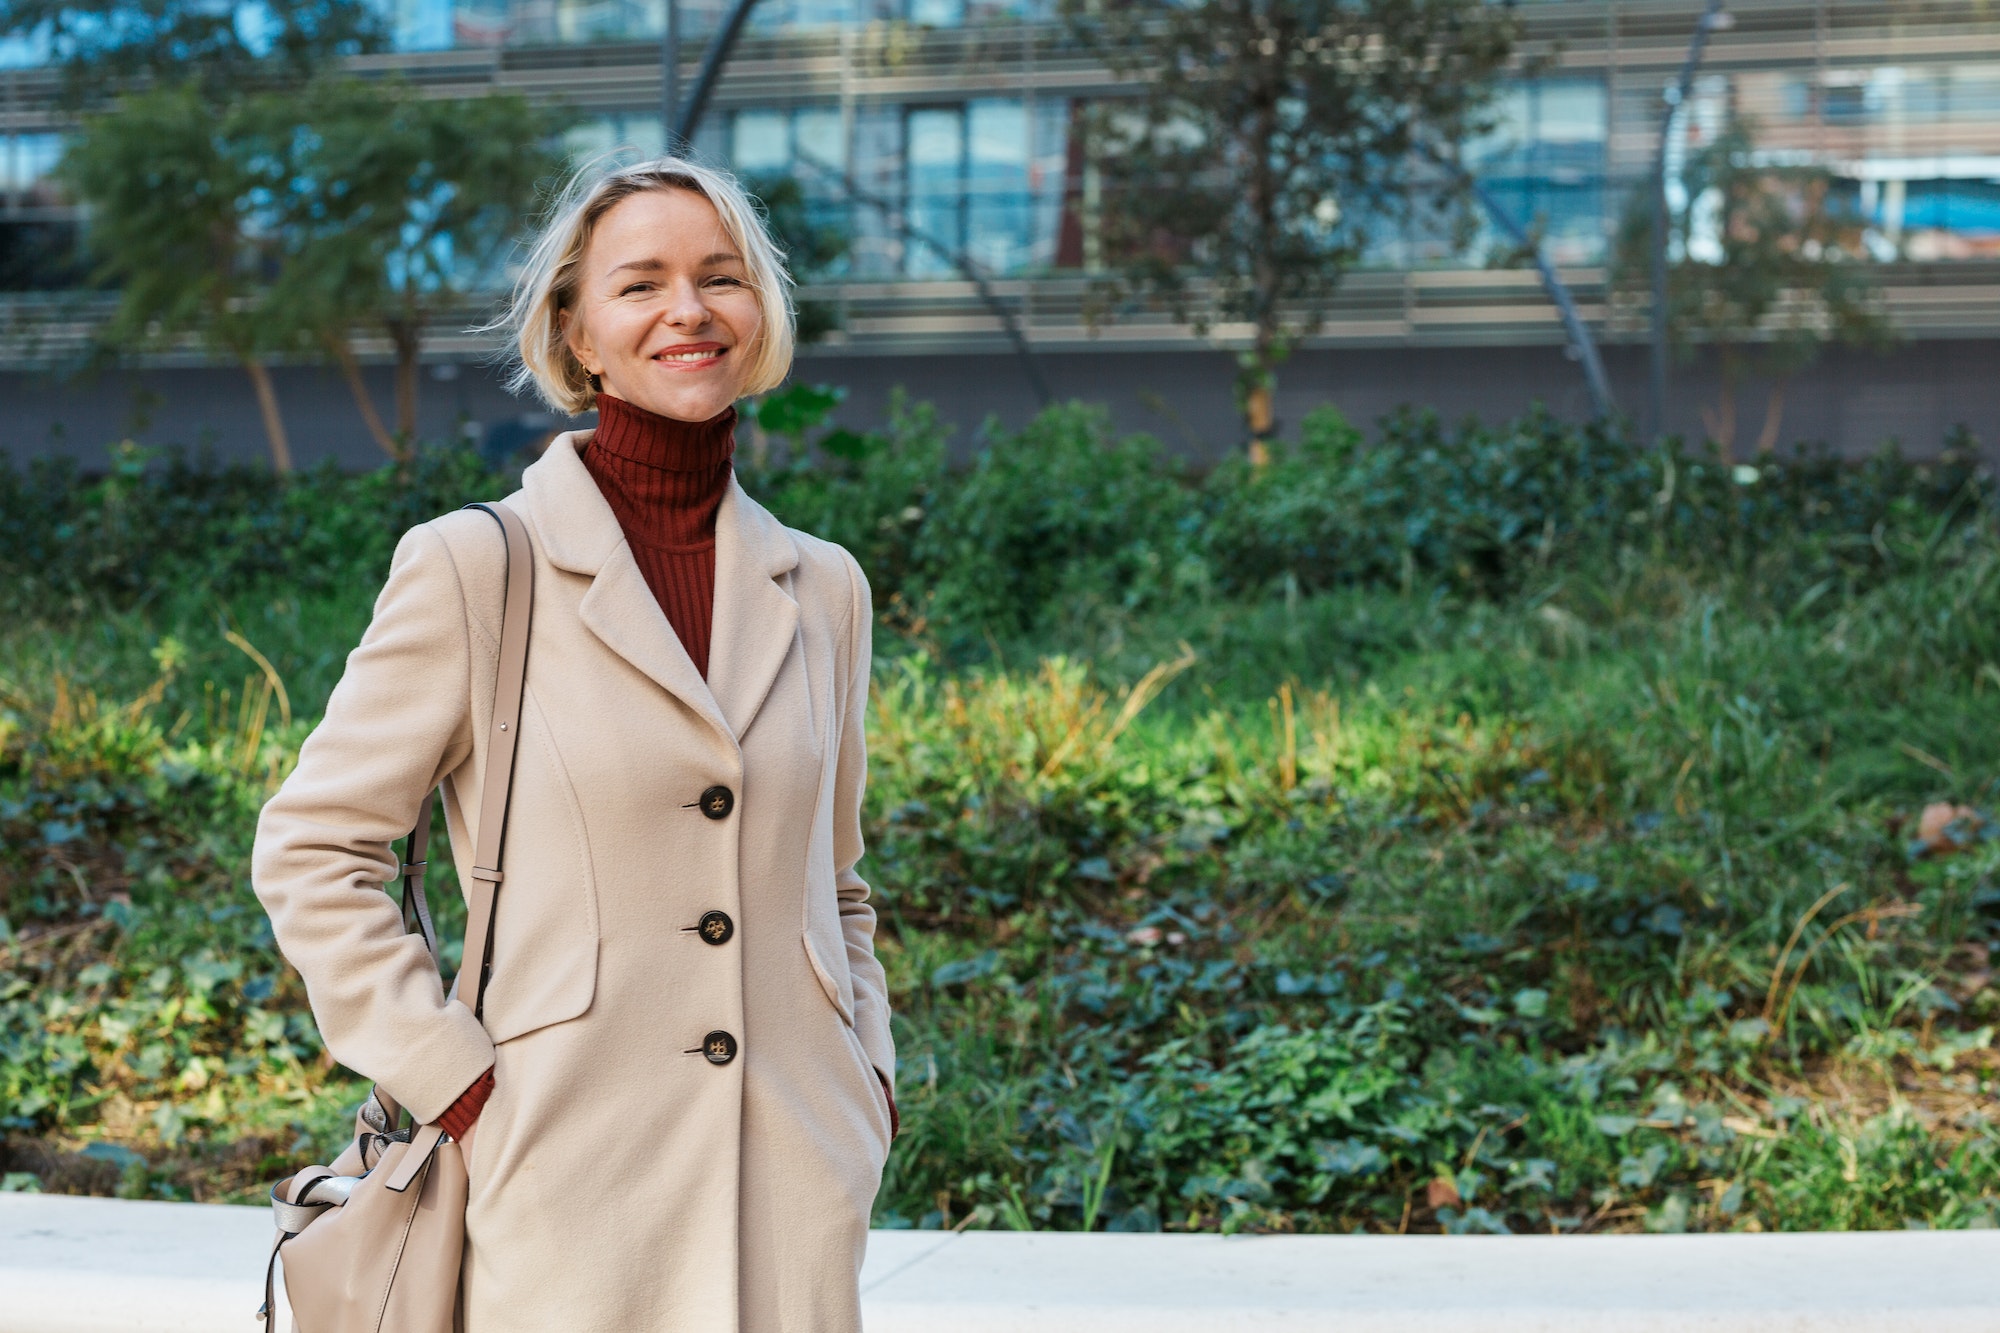 stylish-business-woman-smiling-while-standing-outdoors-in-the-financial-district